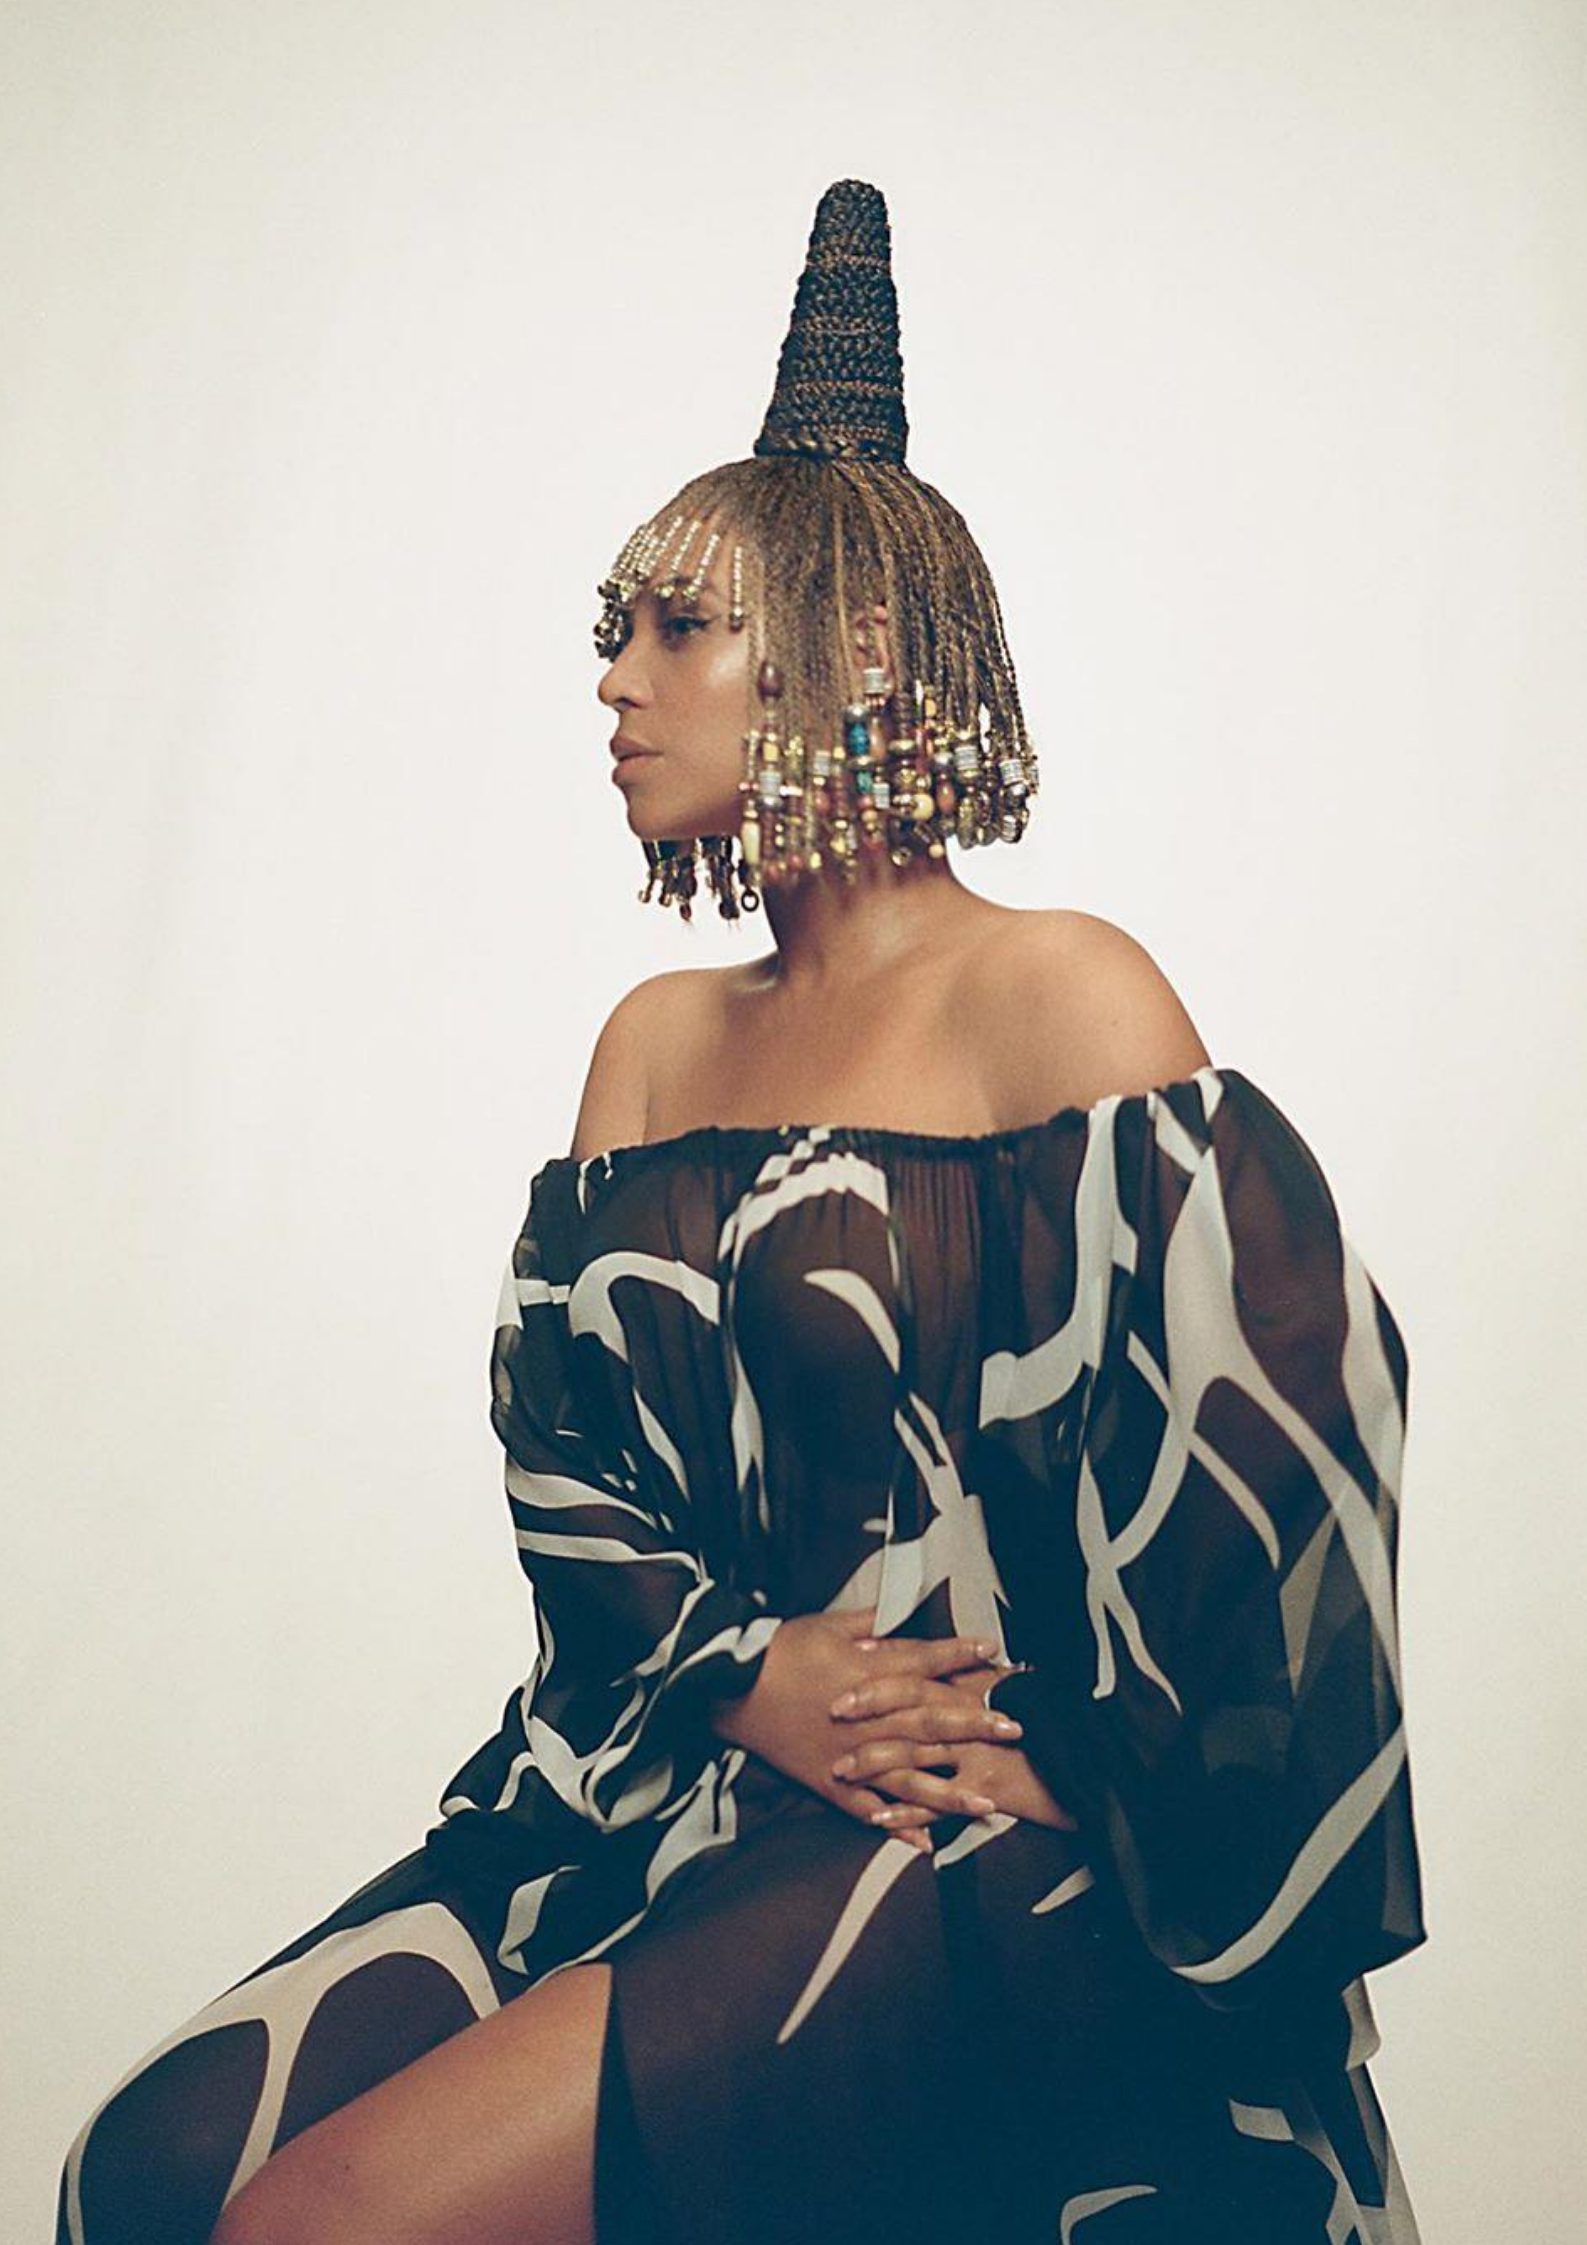 A CELEBRATION OF THE AFRICAN DESIGNERS BEHIND BEYONC??’S ‘BLACK IS KING’ STYLE